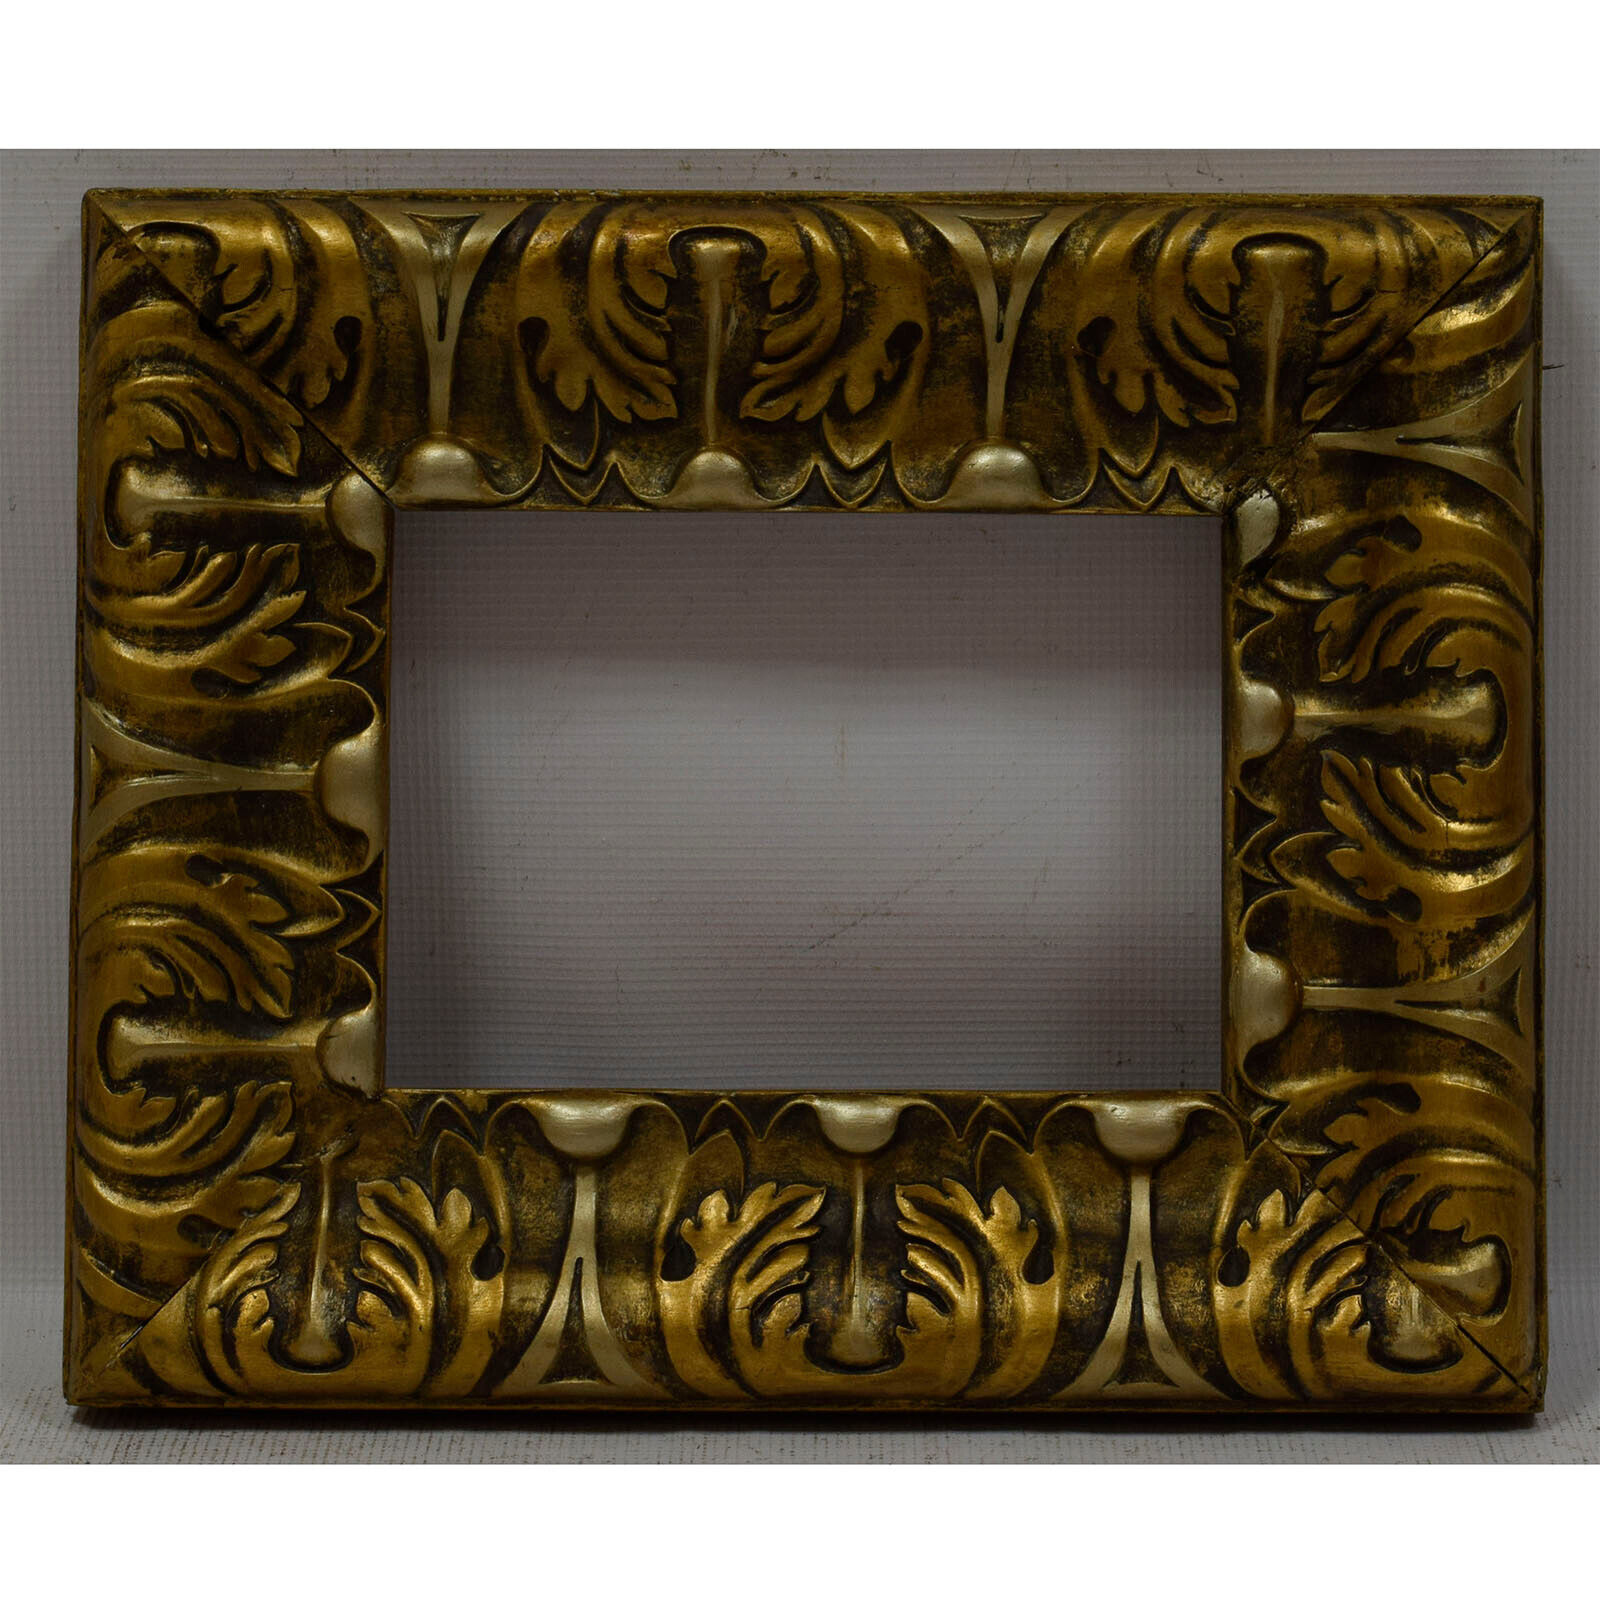 Ca.1850-1900 Old wooden frame decorative Internal: 9x6.2 in